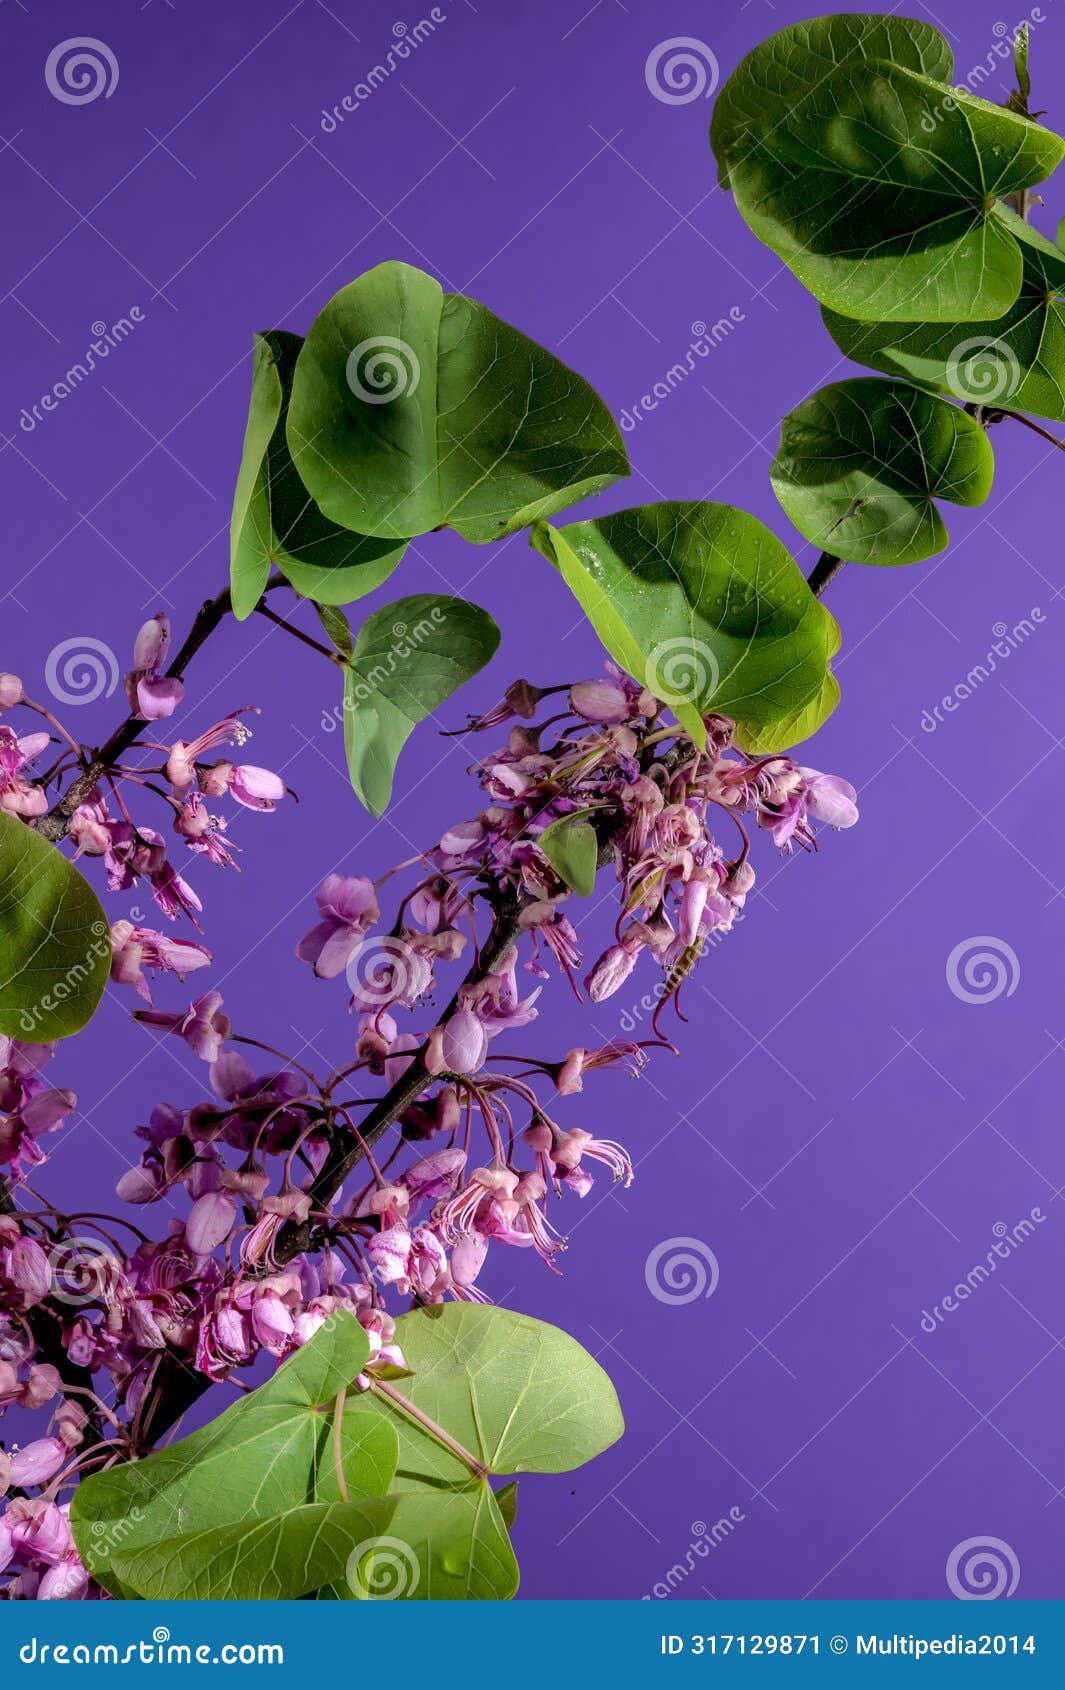 blooming cercis siliquastrum on a purple background